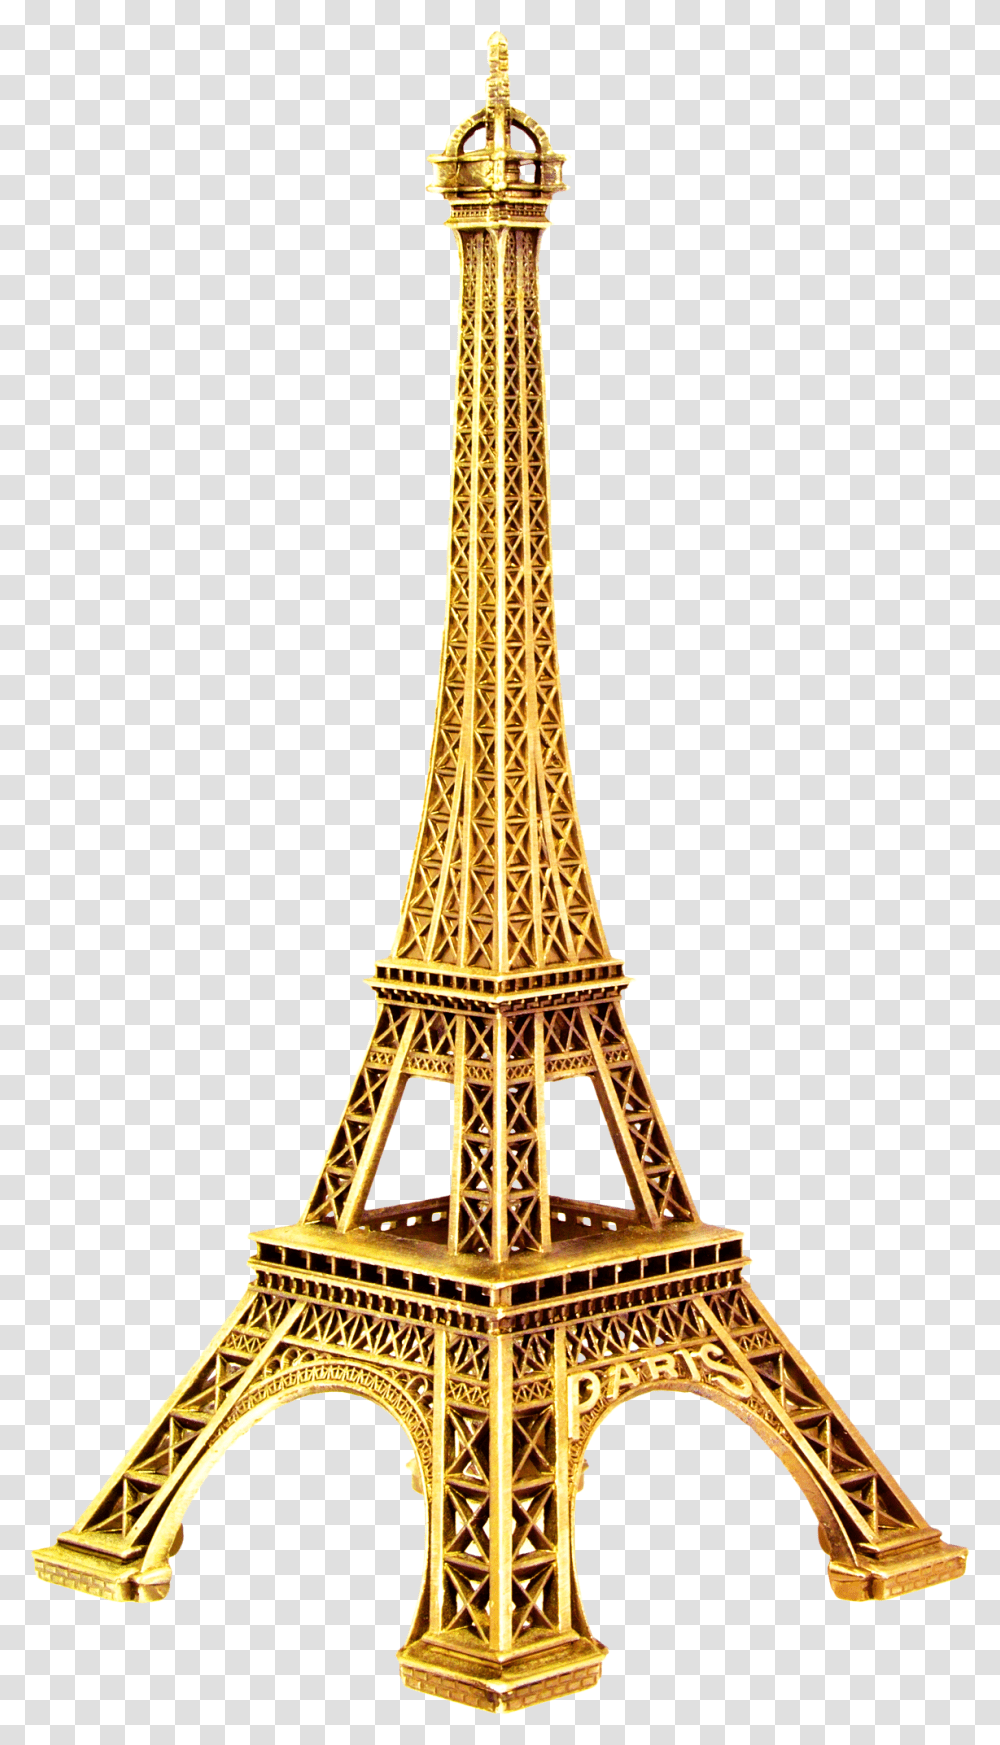 Eiffel Tower Stock Photography Clip Art Gold Eiffel Tower, Architecture, Building, Spire, Steeple Transparent Png